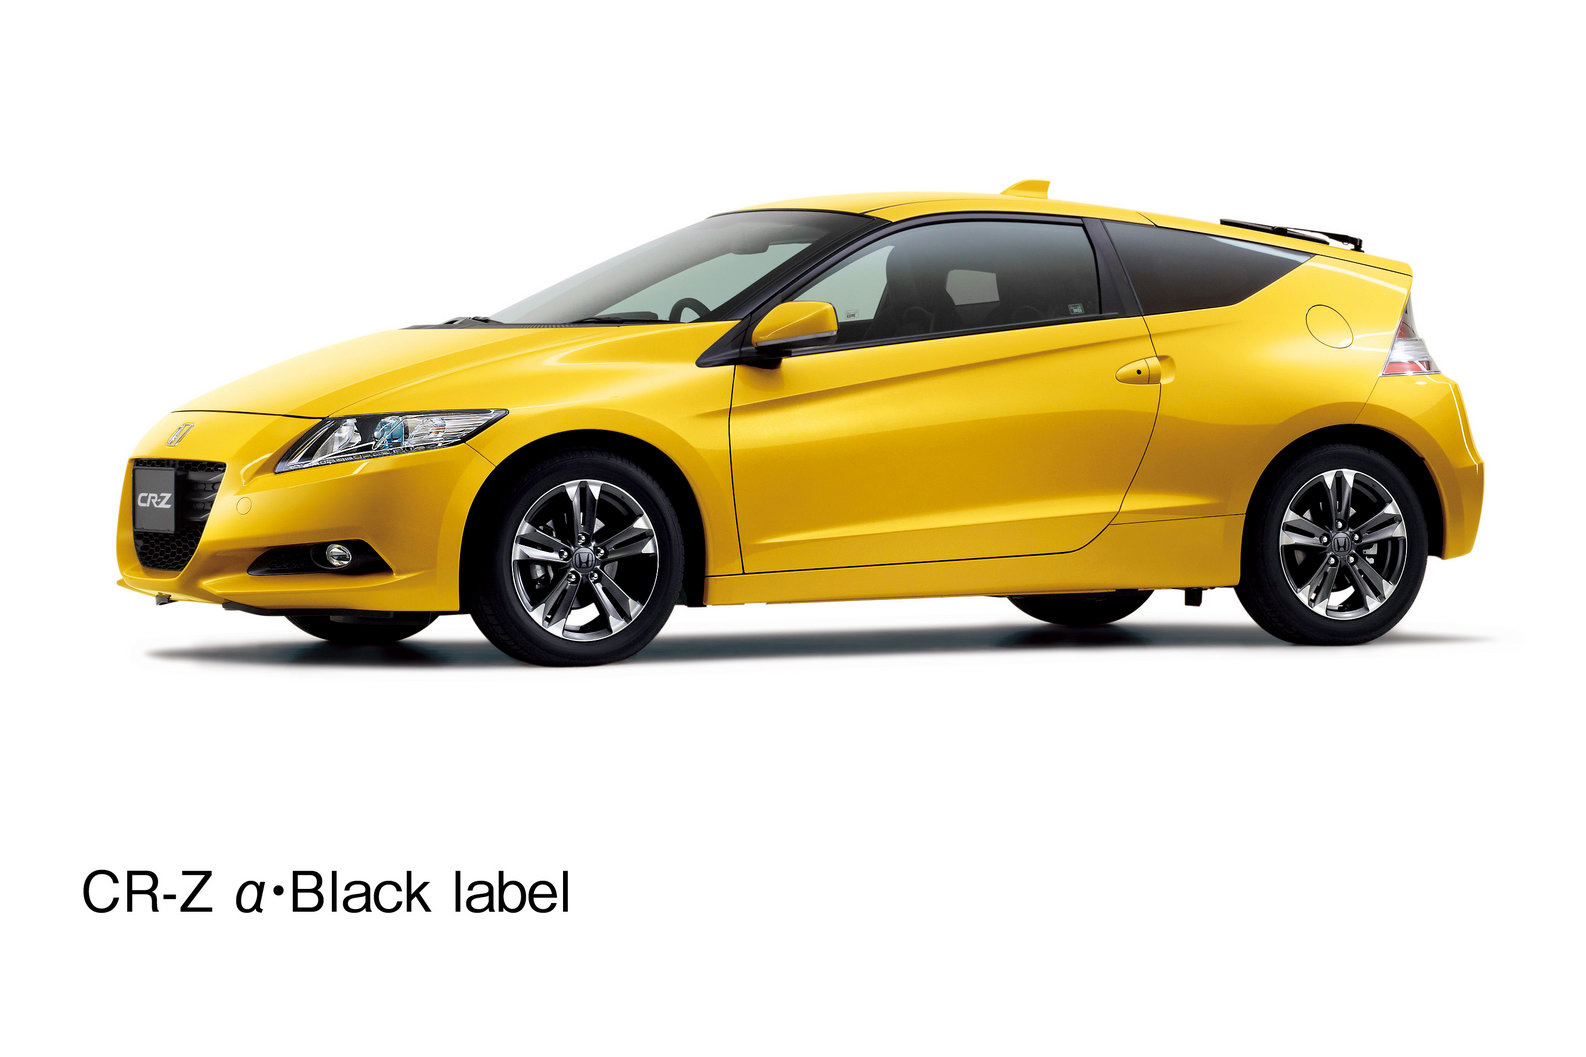 New JDM Honda CR-Z α Black Label with Limited Edition…Yellow Hue